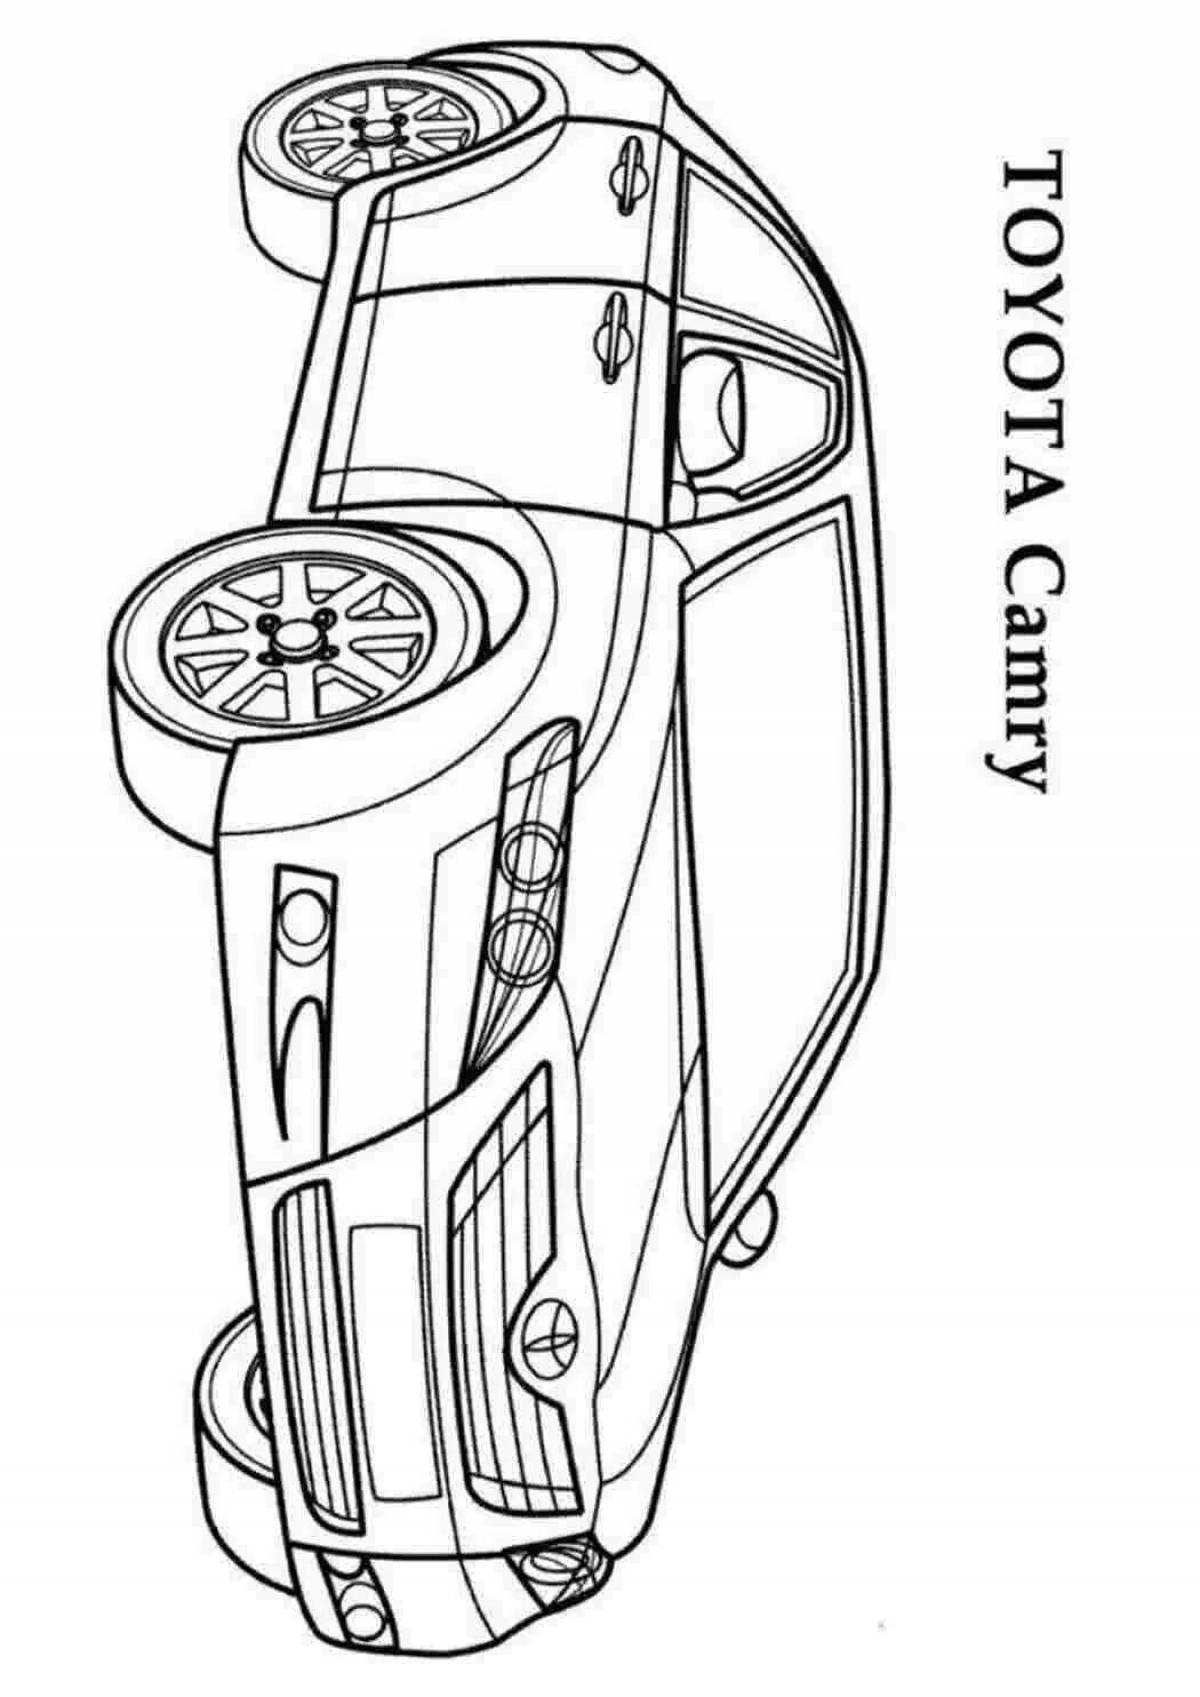 Colorful camry 70 coloring page